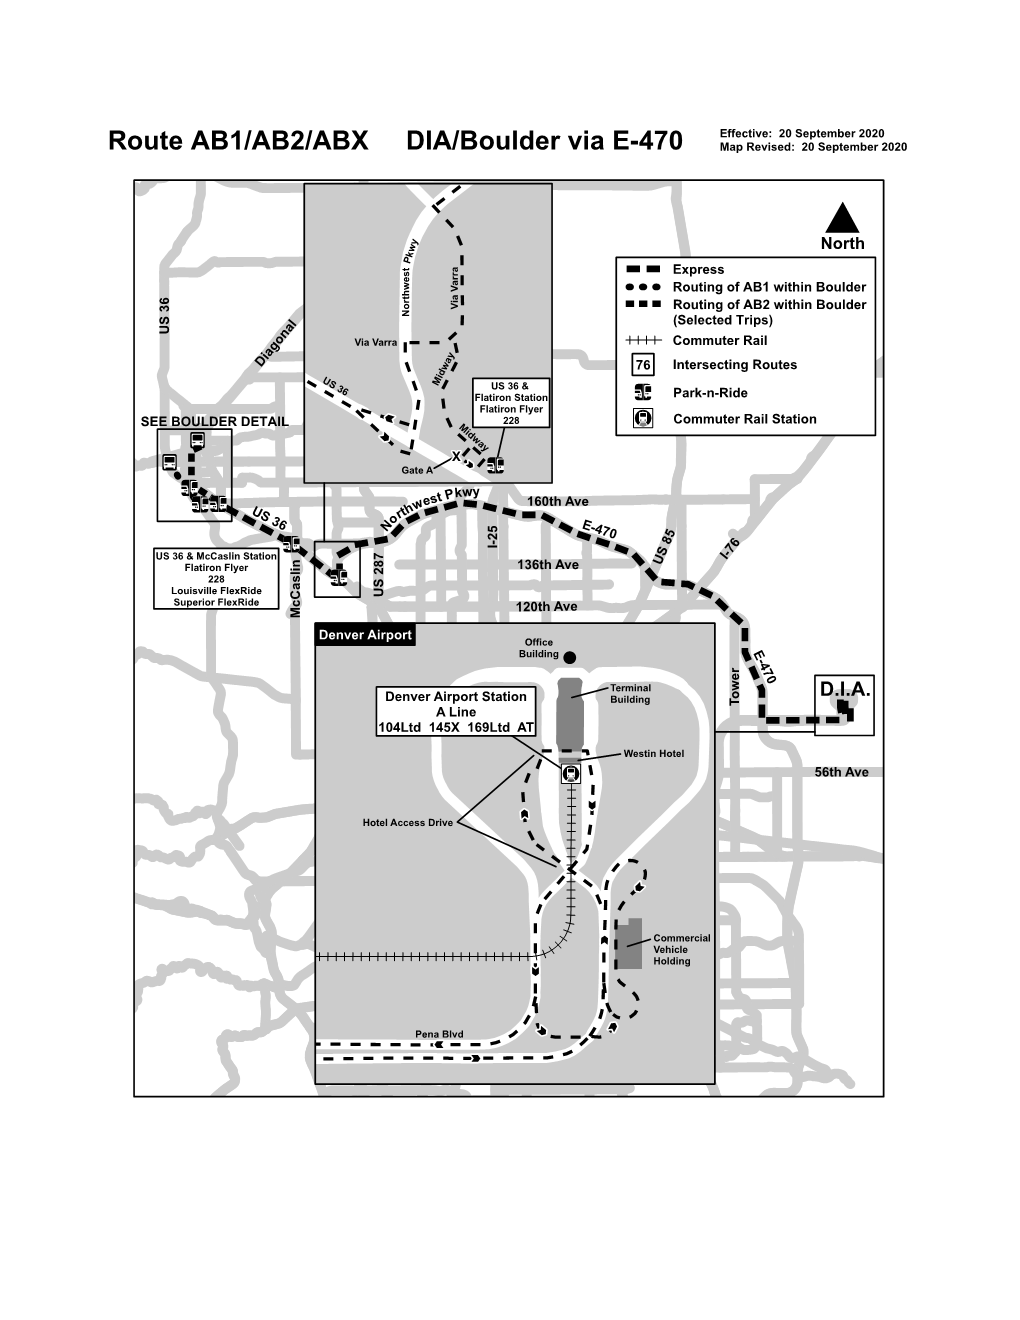 Route AB1/AB2/ABX DIA/Boulder Via E-470 Map Revised: 20 September 2020 # Y North W K P Express Routing of AB1 Within Boulder